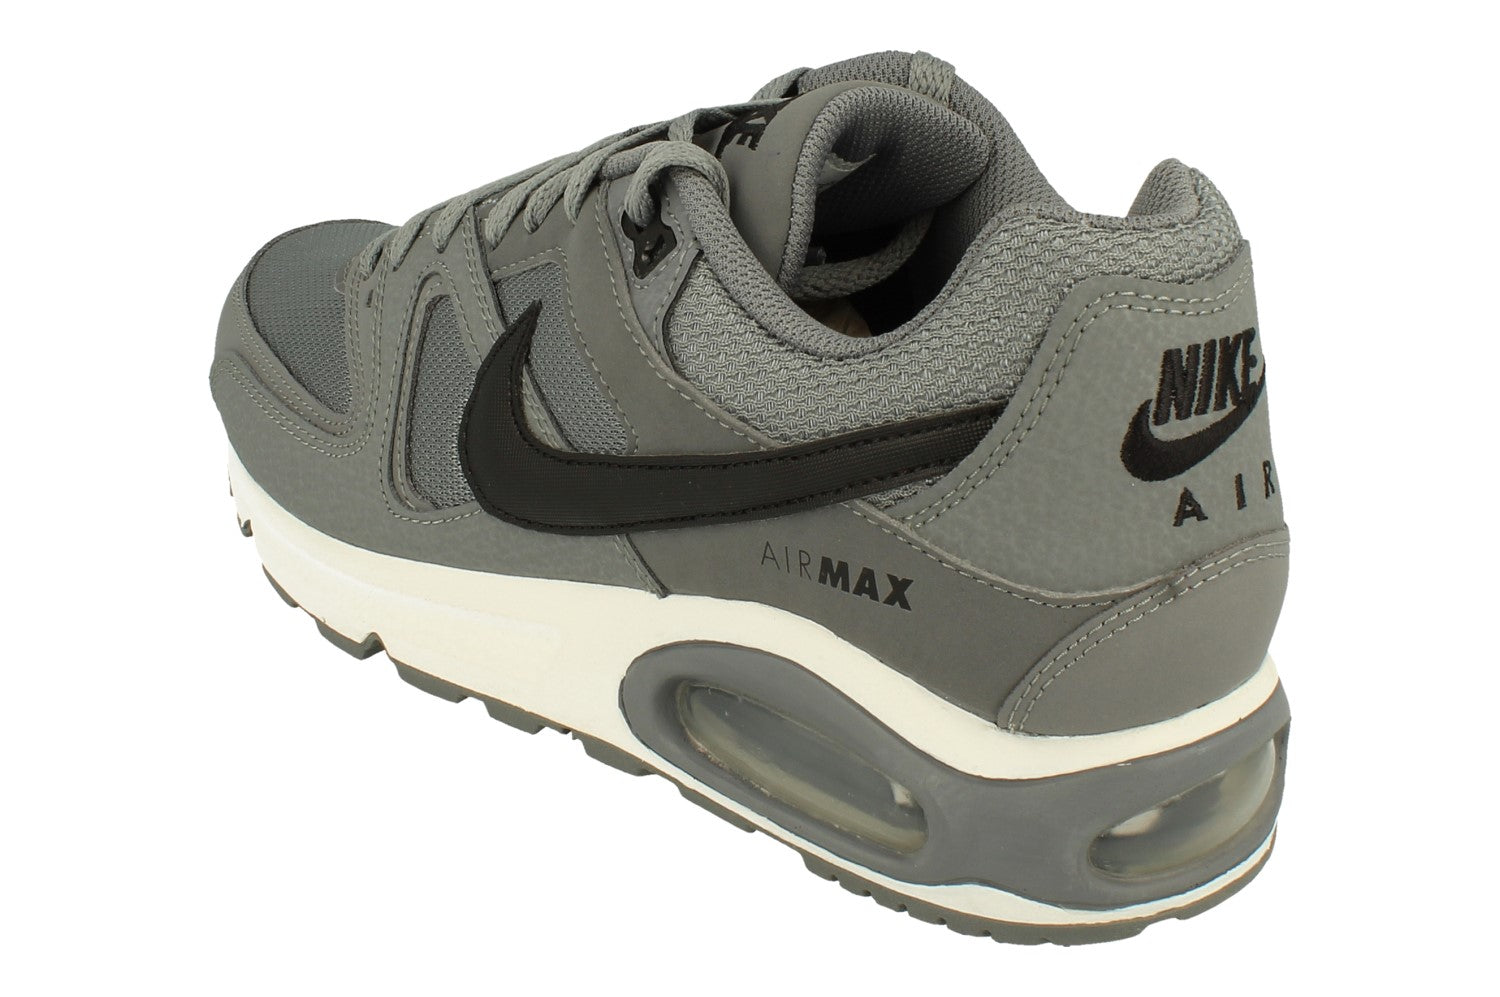 lo hizo comestible Hierbas Buy Nike Air Max Command Mens Trainers 629993 (uk 6.5 us 7.5 eu 40.5, cool  grey black white 012) 012 - Free UK Delivery - Super Fast EURO & USA  Delivery! – KicksWorldwide